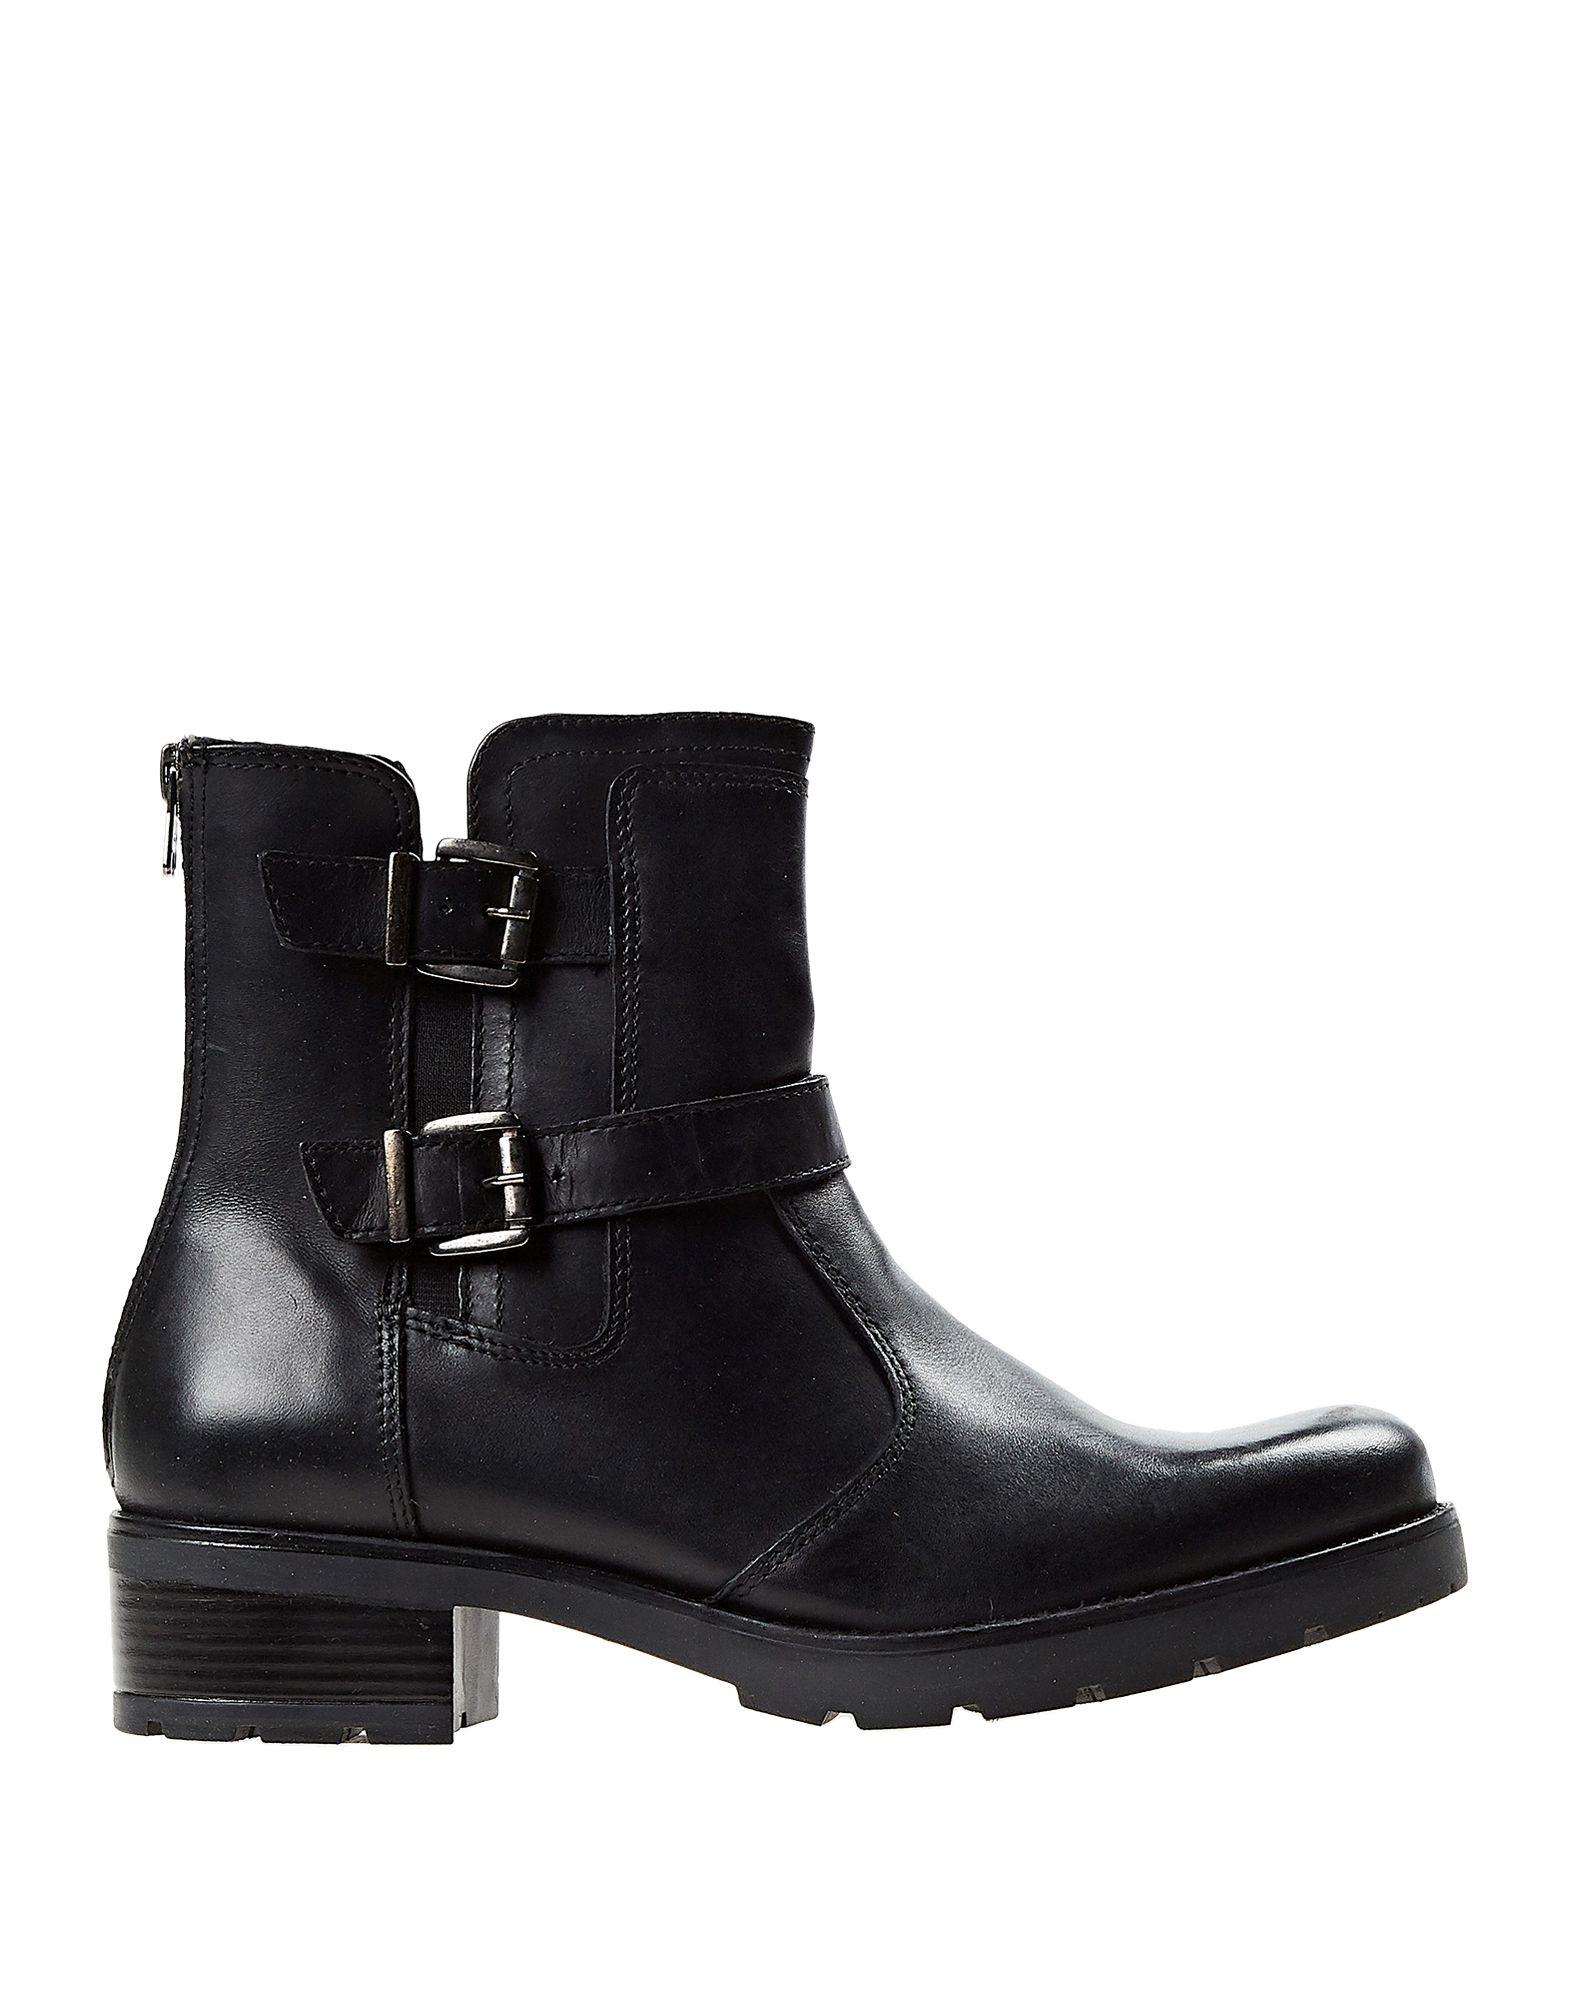 Primadonna Leather Ankle Boots in Black - Lyst